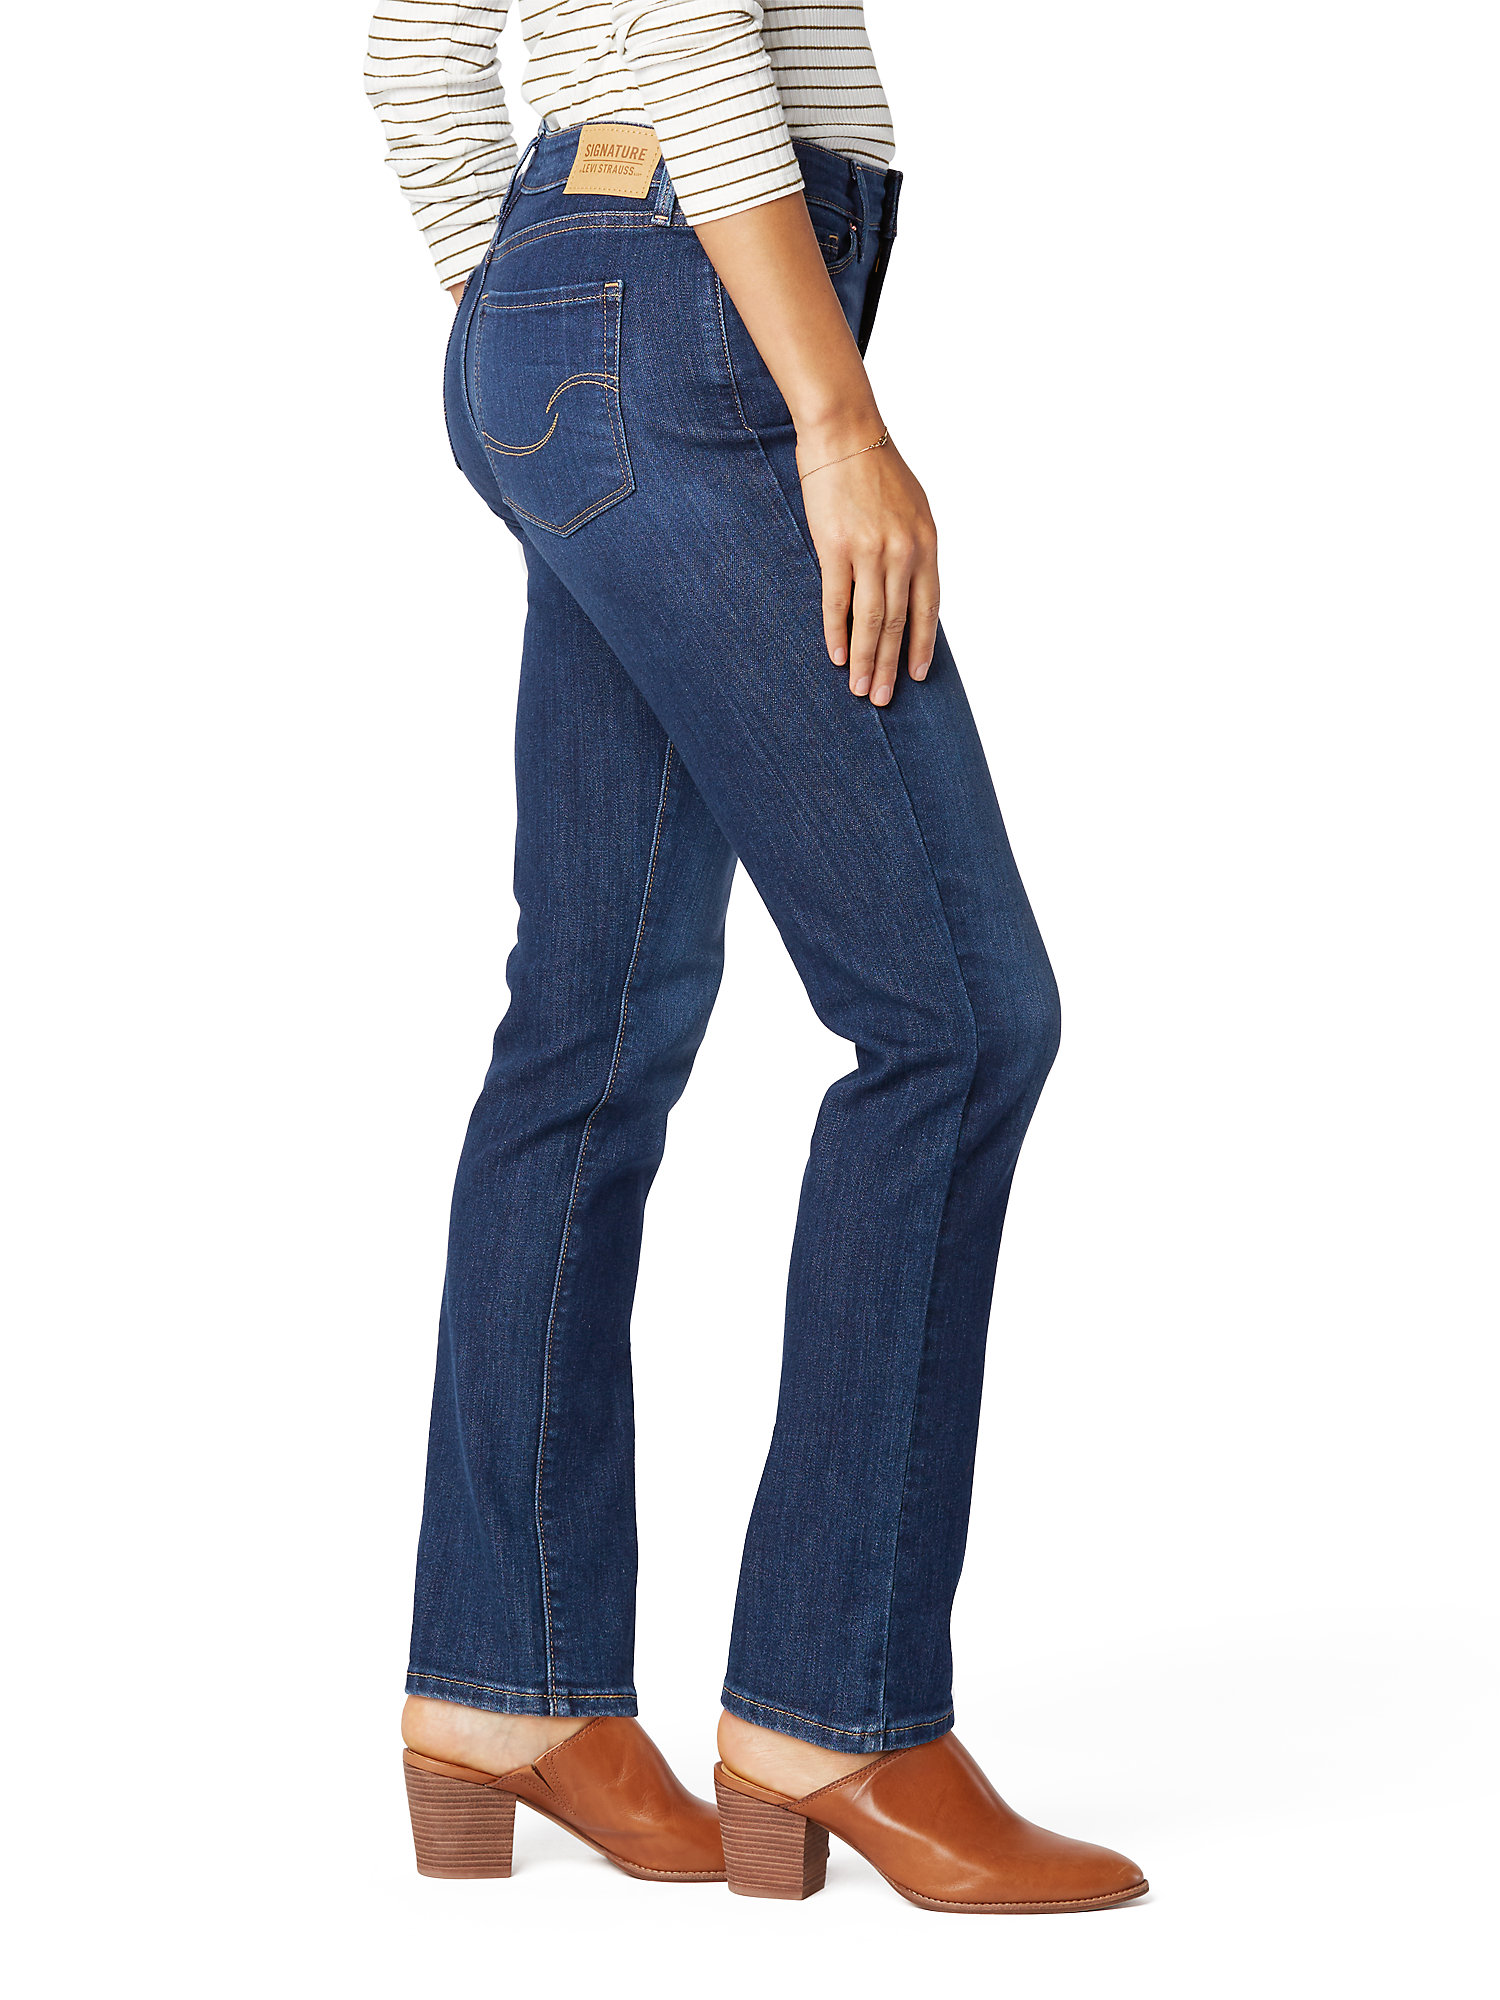 Signature by Levi Strauss & Co. Women's and Women's Plus Size Mid Rise Modern Straight Jeans, Sizes 2-28 - image 3 of 3